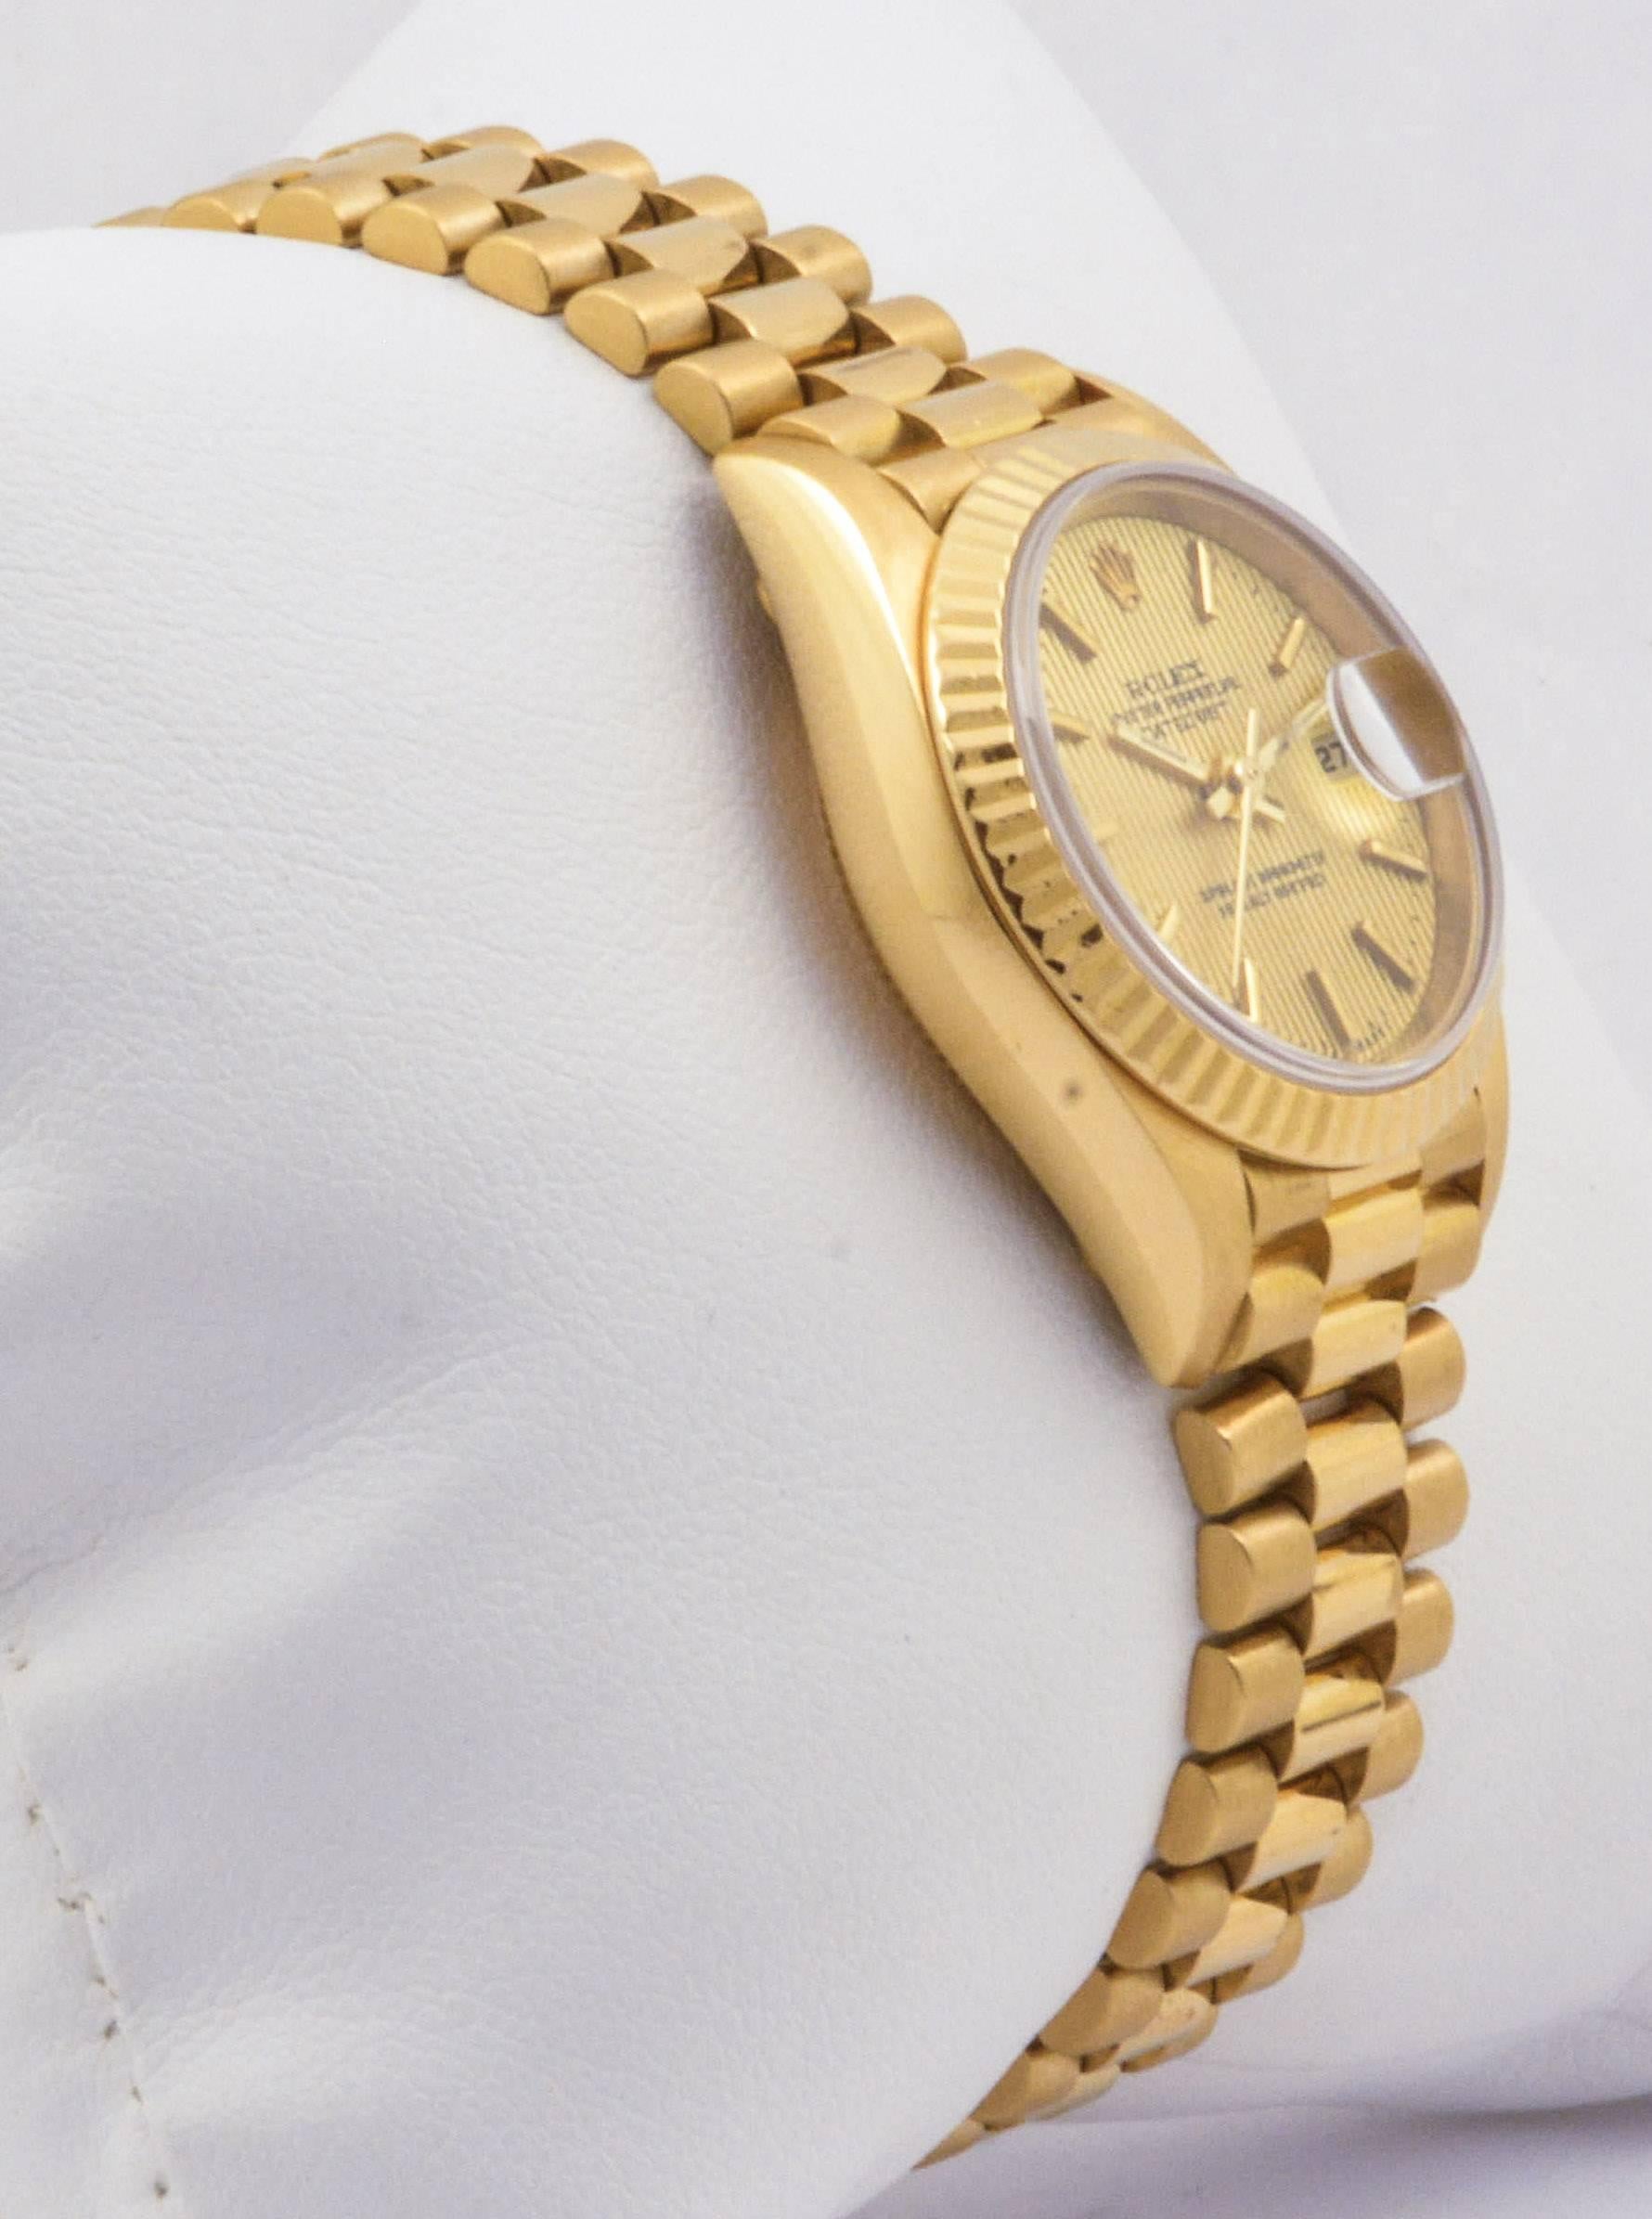 This 1995 vintage 26mm Rolex watch is in excellent condition. Fashioned from 18kt yellow gold, this Presidential Rolex features a champagne dial with index dial markers, a sapphire crystal, a fluted bezel, and is complete with a jubilee bracelet.